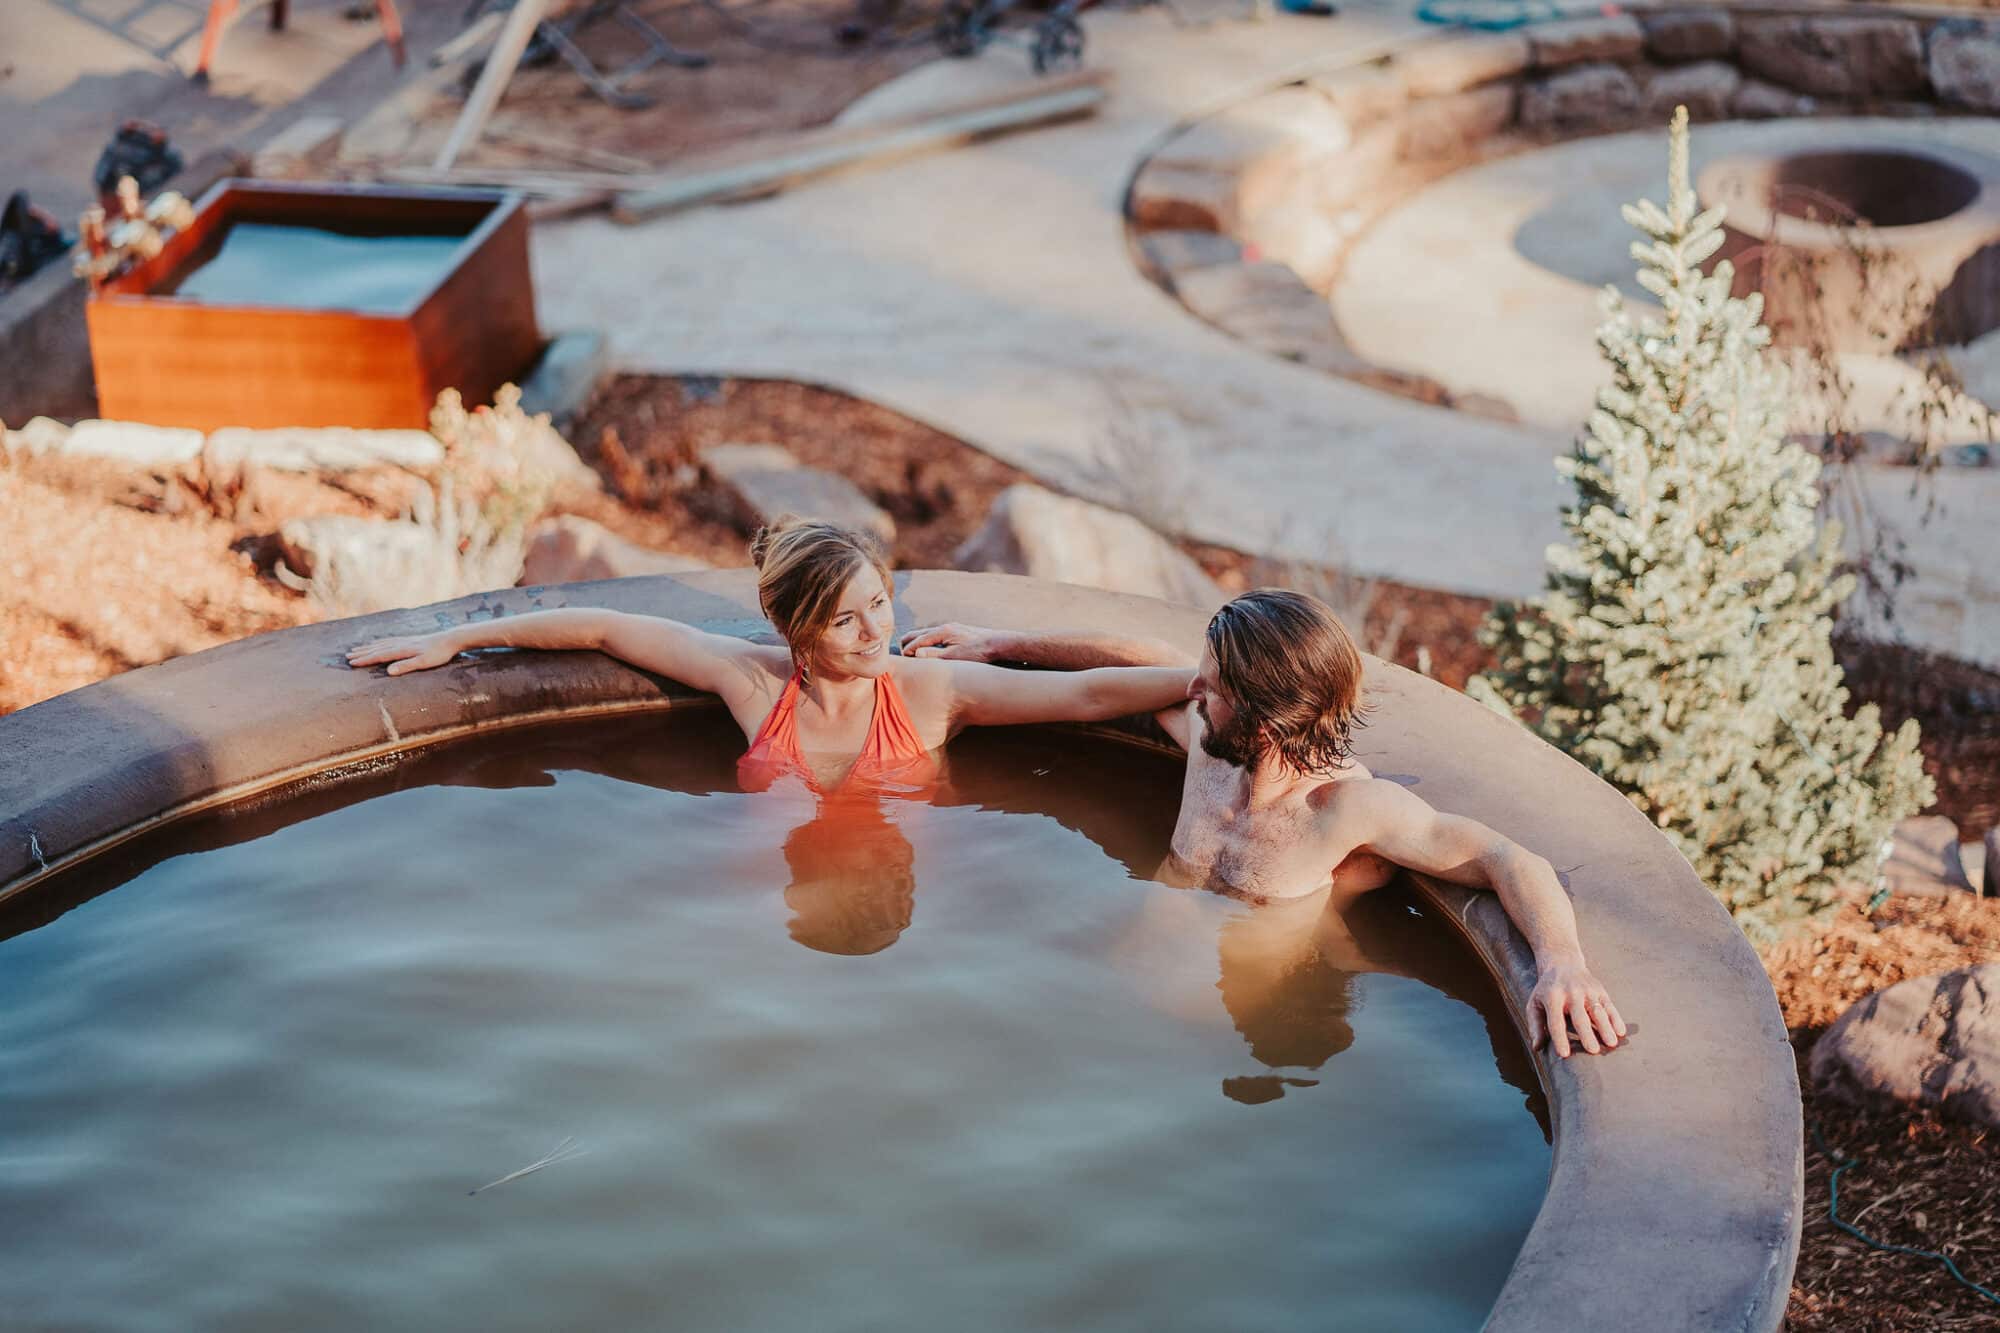 A couple soaks in a pool at Durango Hot Springs